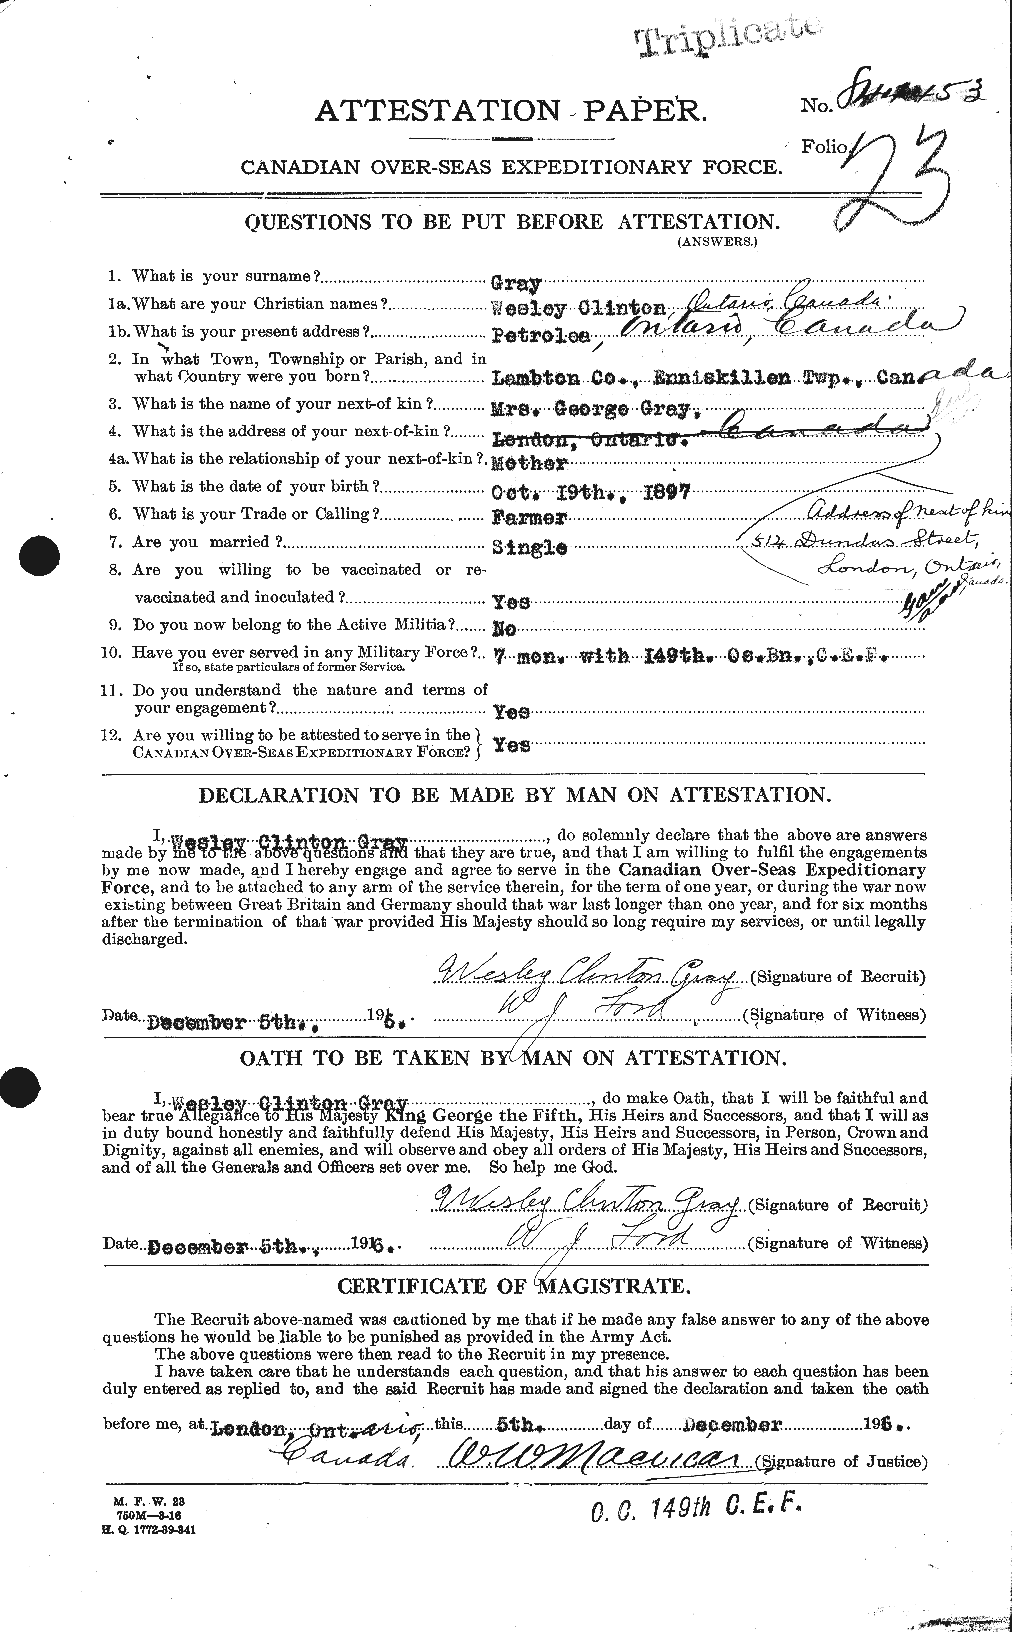 Personnel Records of the First World War - CEF 361756a